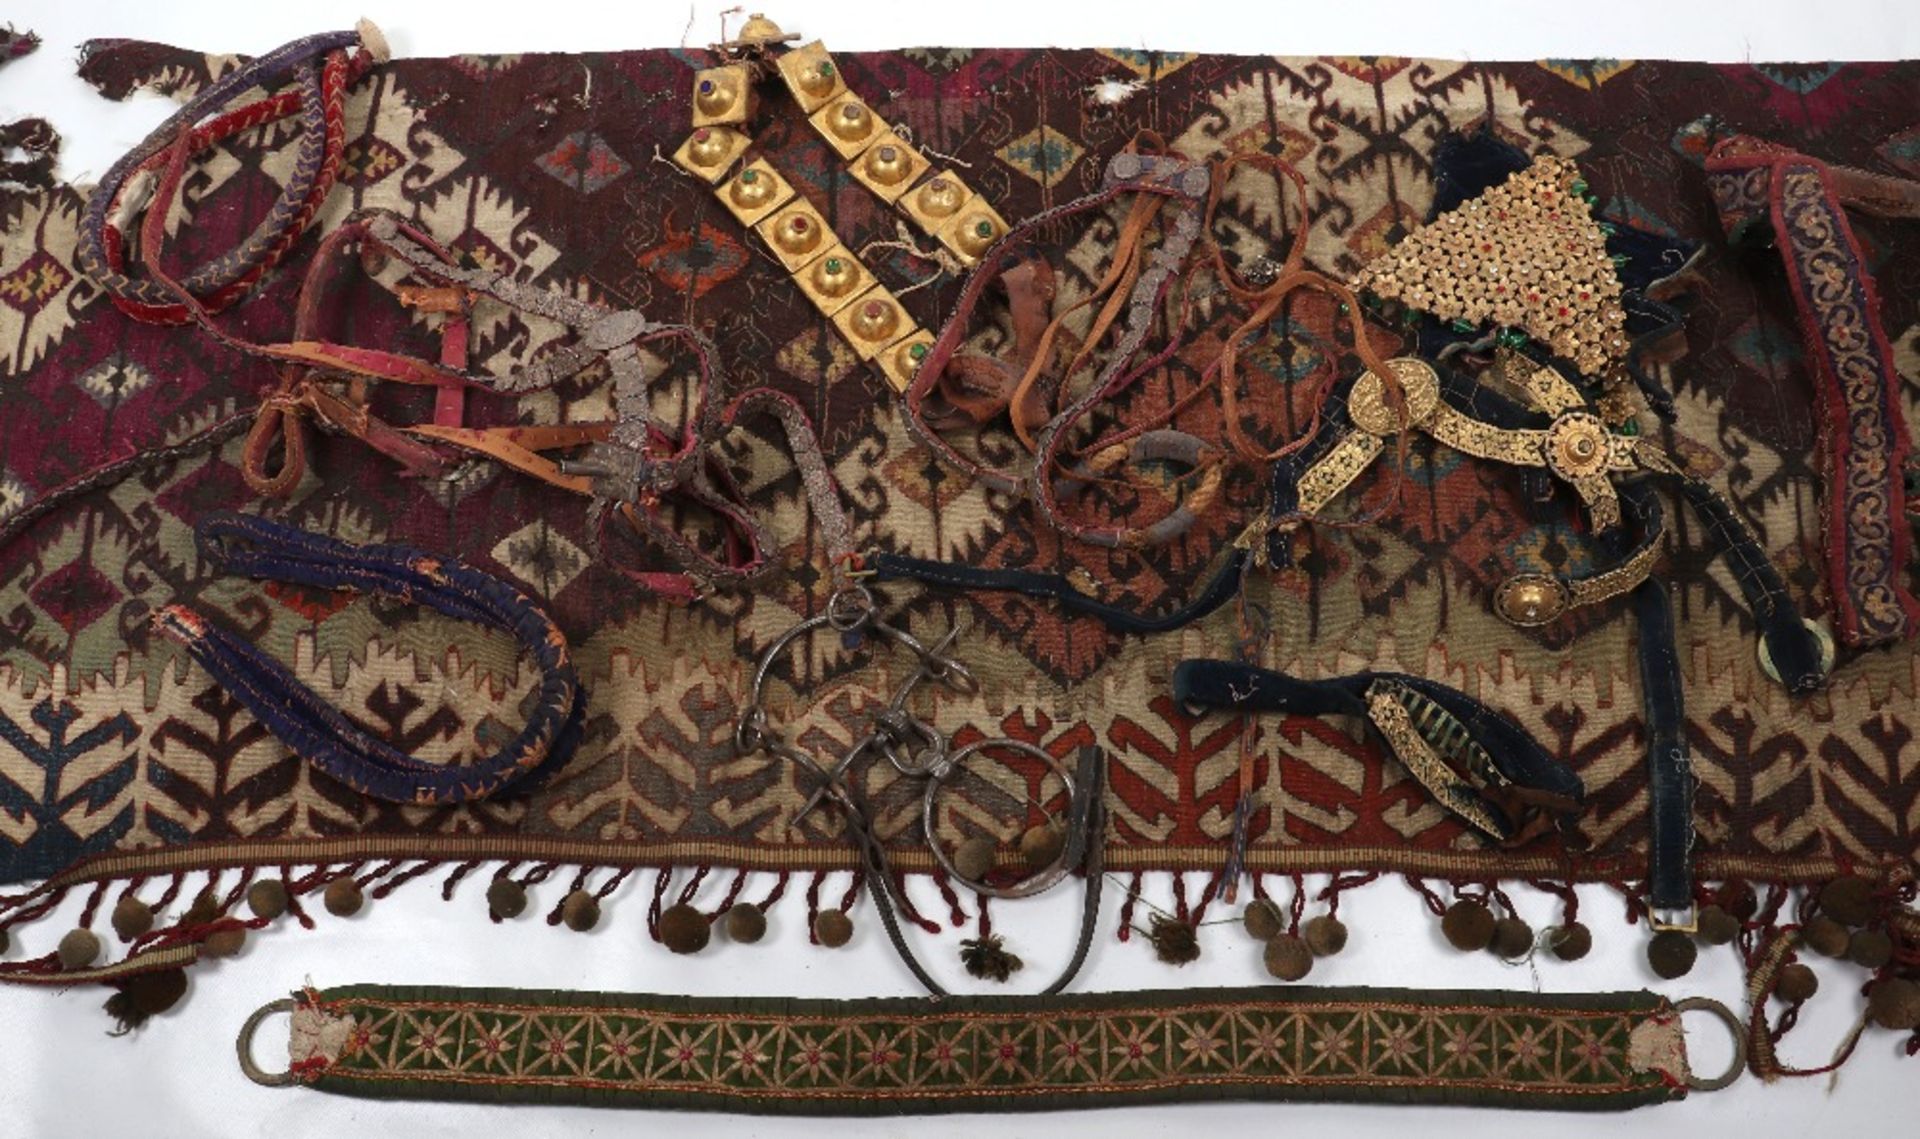 Suitcase Containing Assorted and Elaborate Indian Horse Trappings - Image 4 of 7